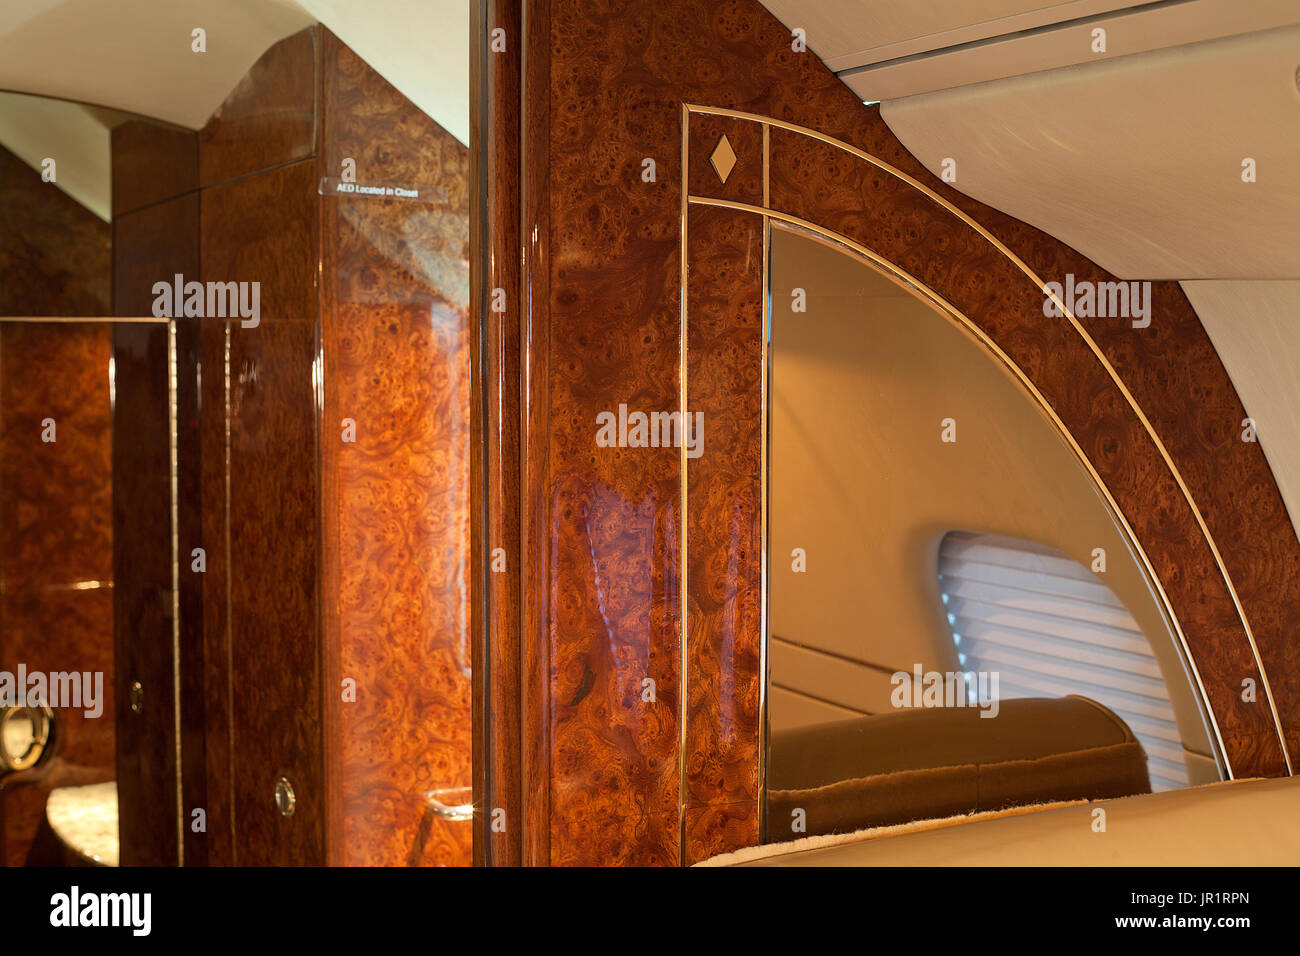 Wood trim with gold inlay and mirror in Lear 60 jet aircraft Stock Photo